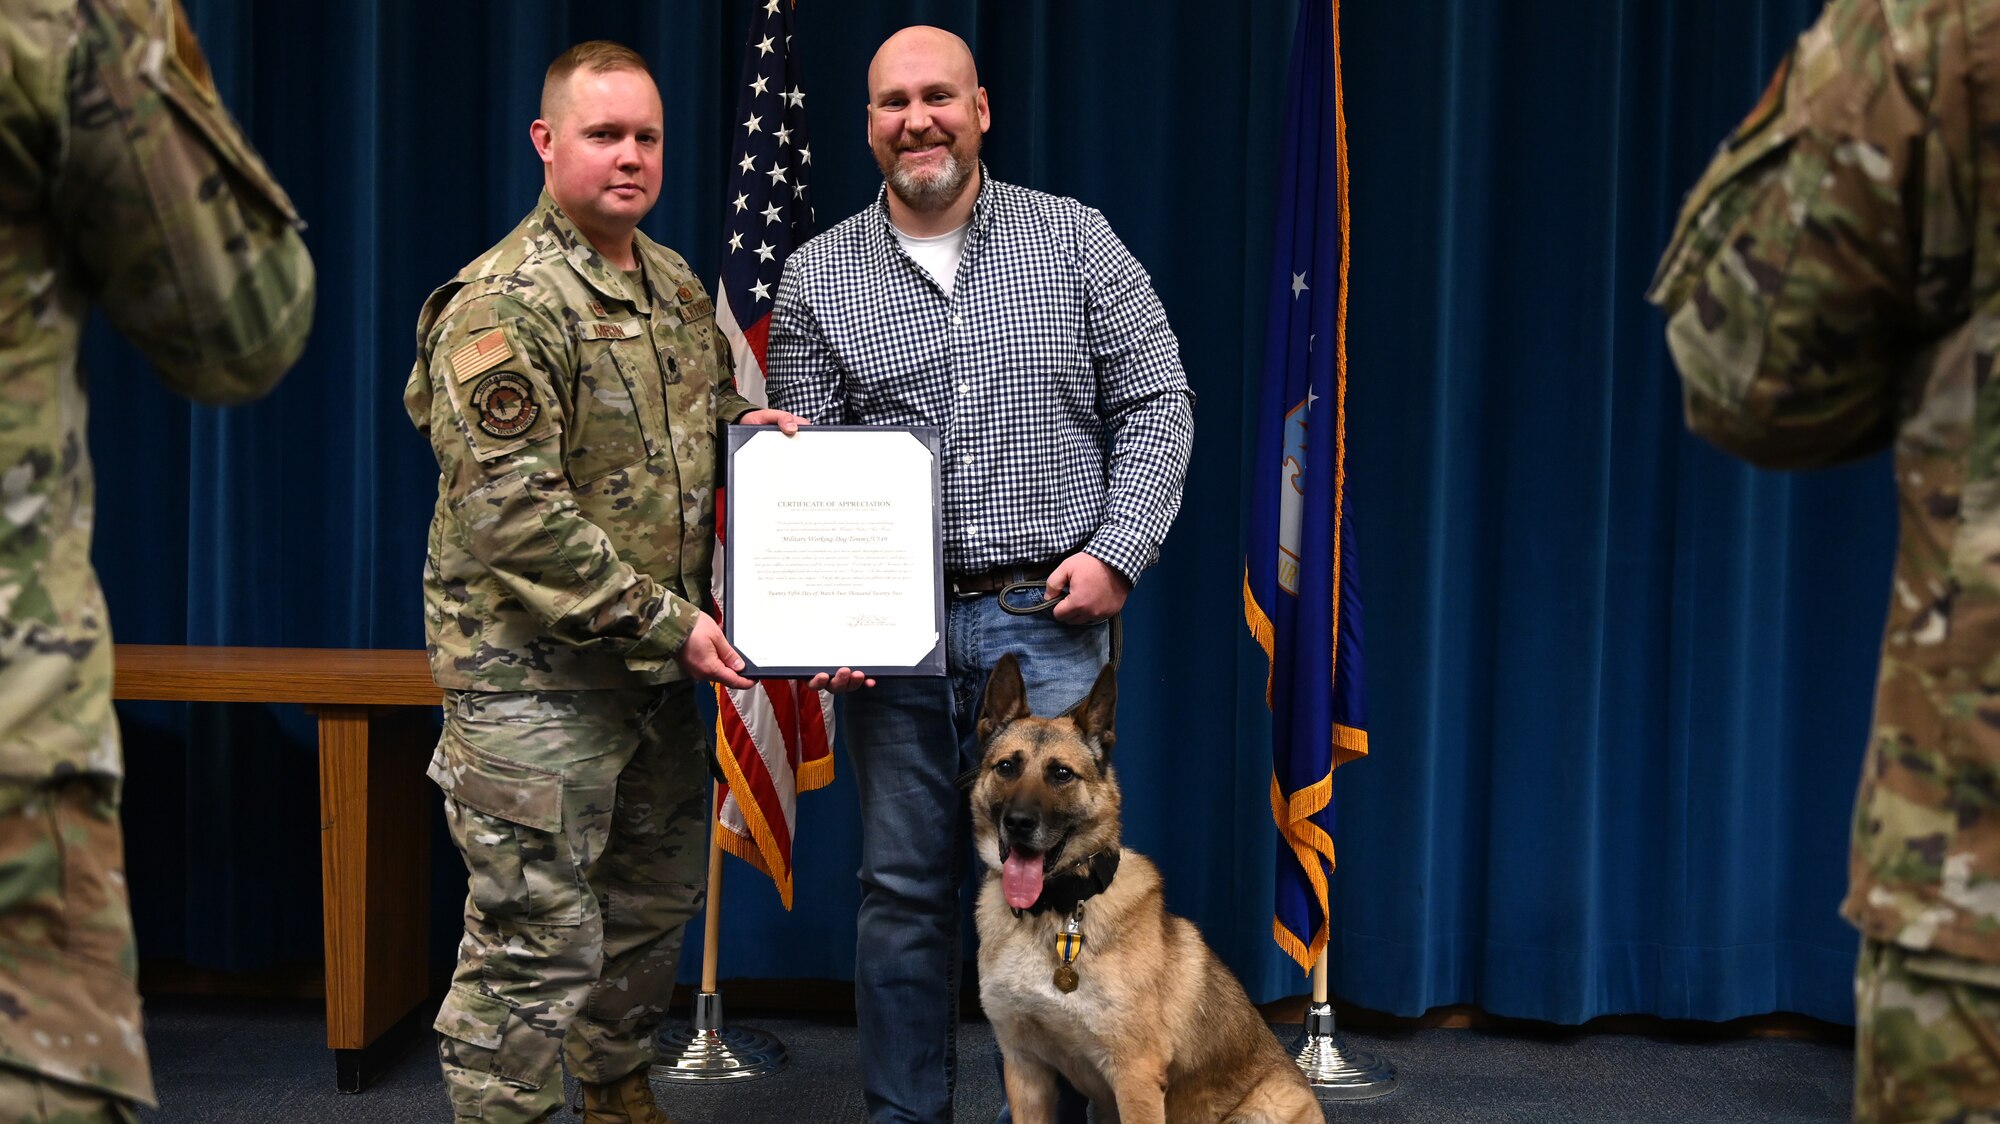 A man and dog accept a certificate.